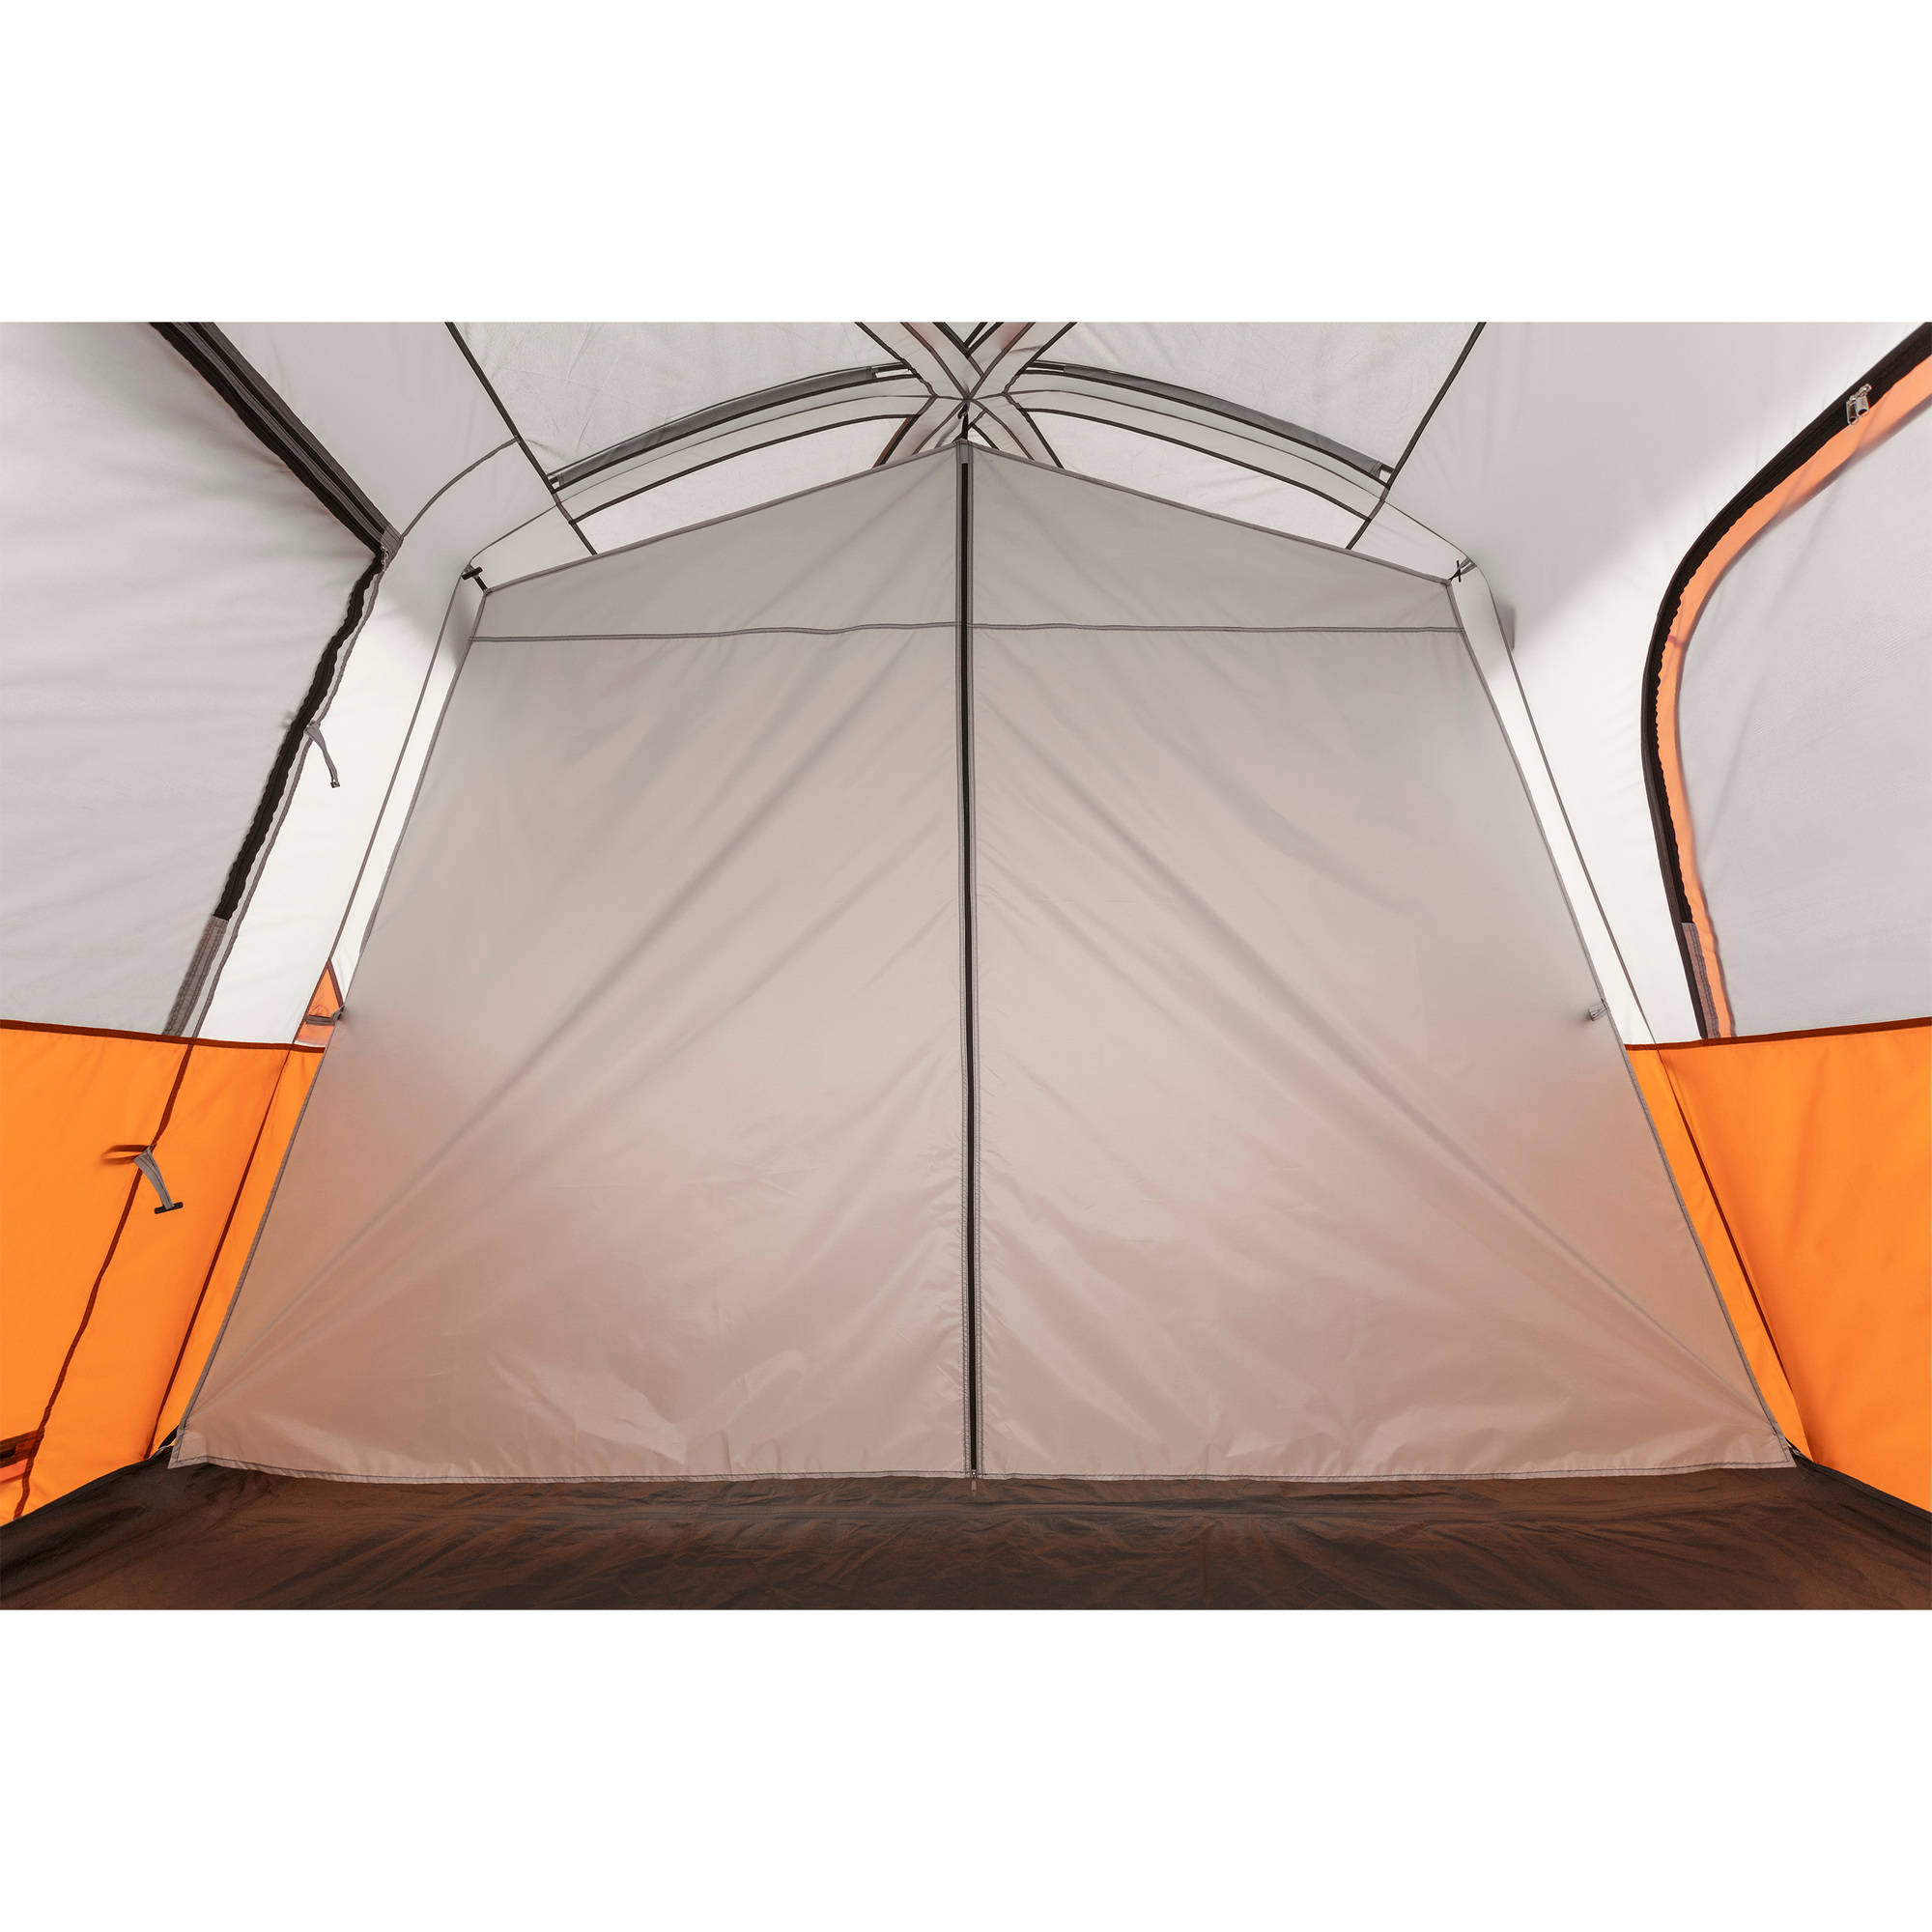 Ozark Trail 13' x 9' with 76"H Family Cabin Tent, Sleeps 8 - image 4 of 8